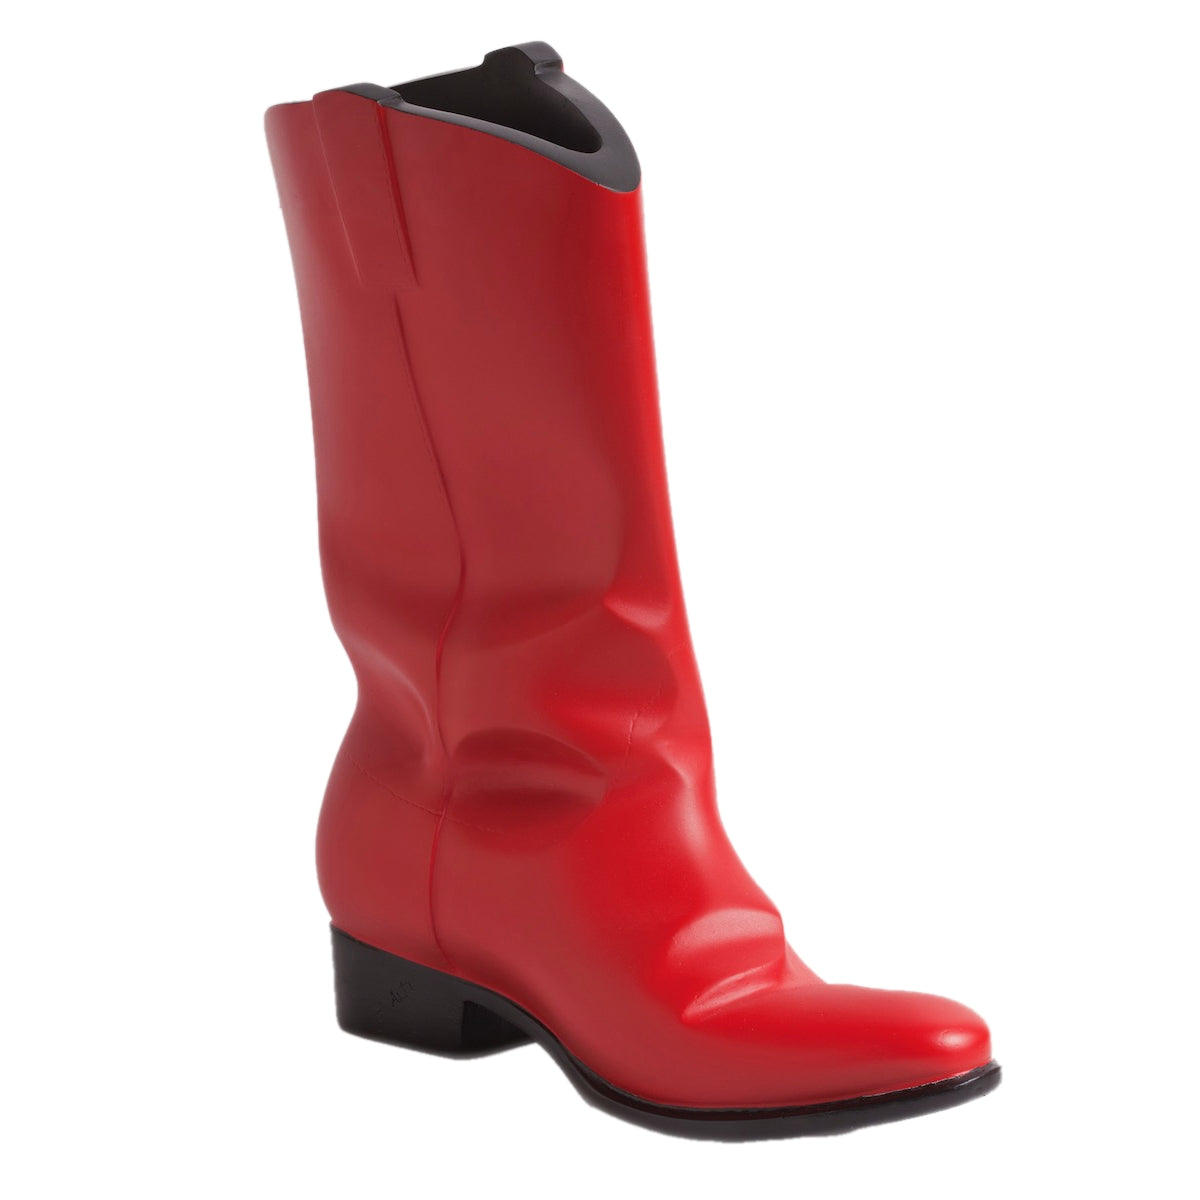 CHERRY RED RIDING BOOT / RESIN REPRODUCTION